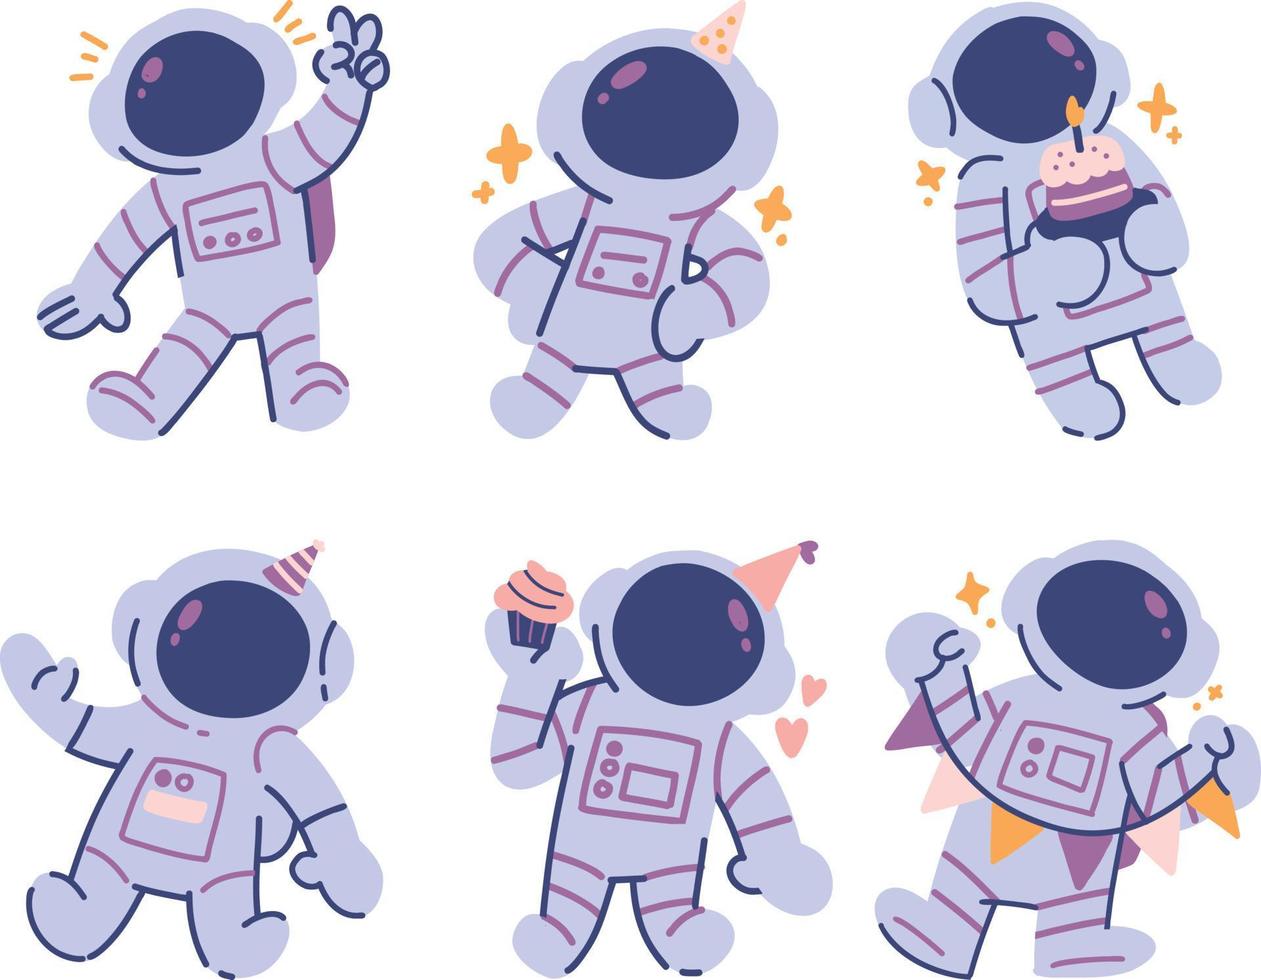 Astronaut character set. Vector illustration in cartoon style isolated on white background.